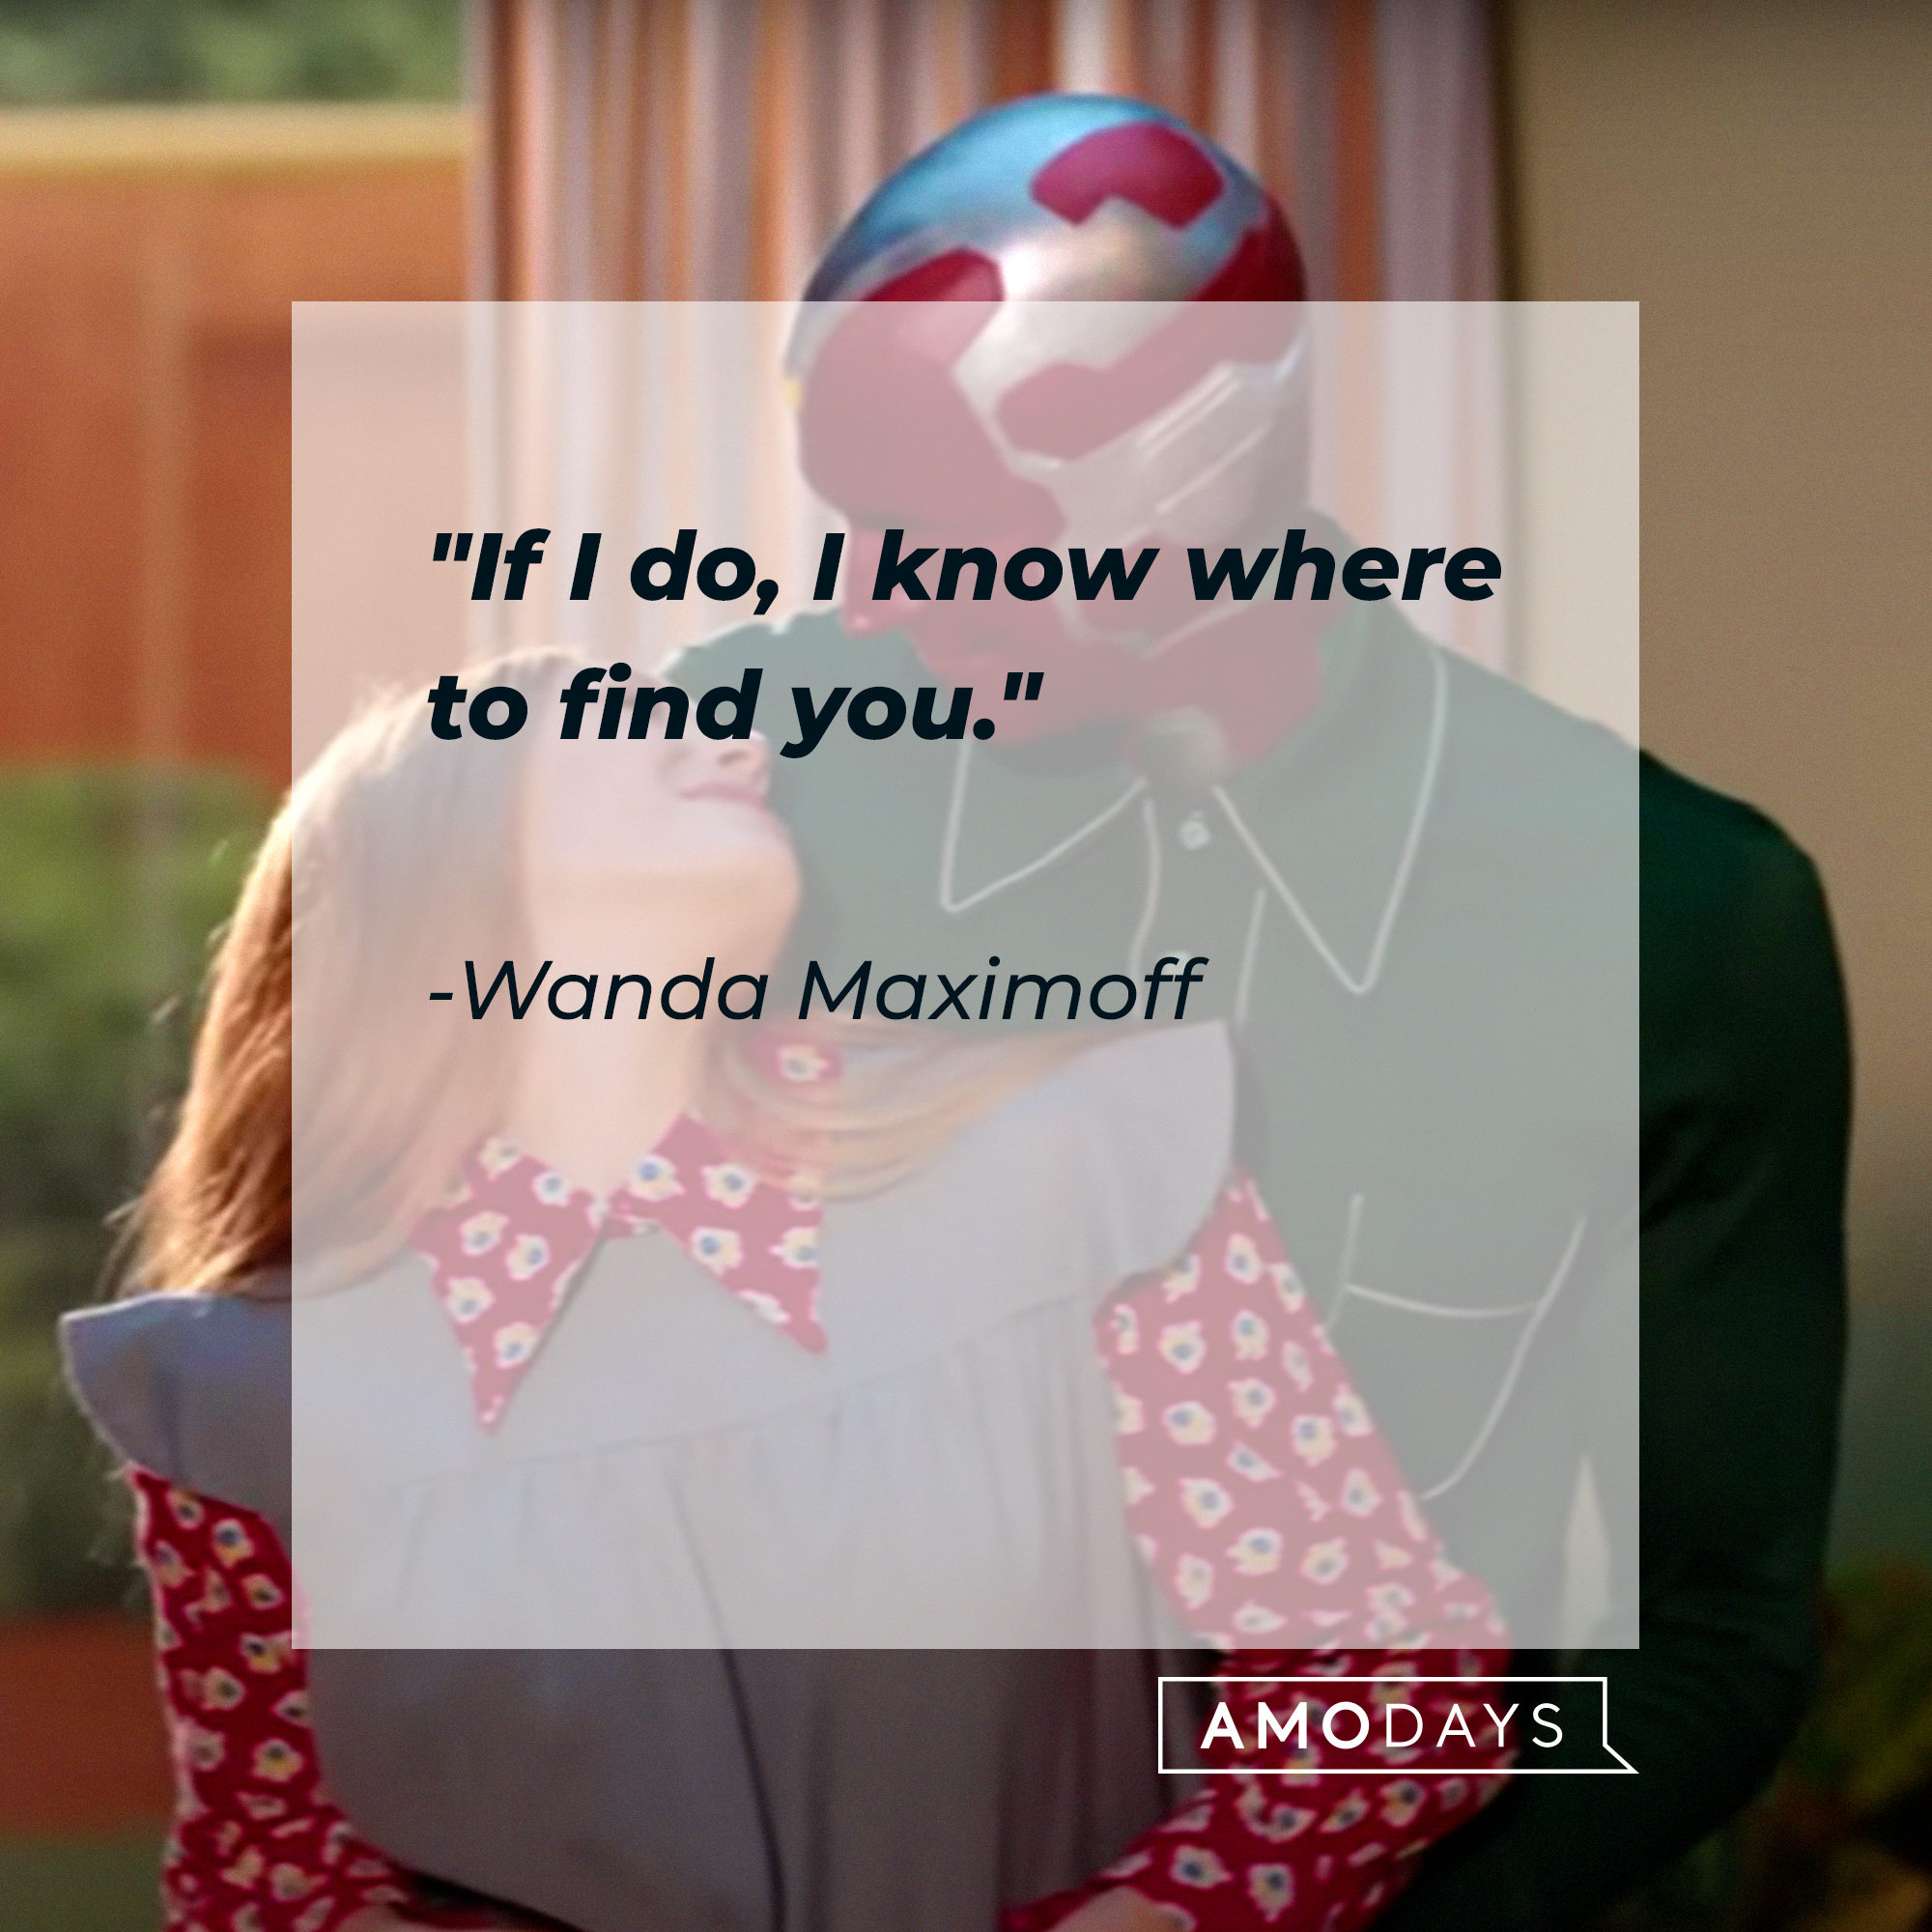 Wanda Maximoff's quote: "If I do, I know where to find you." | Source: Facebook/wandavisionofficial